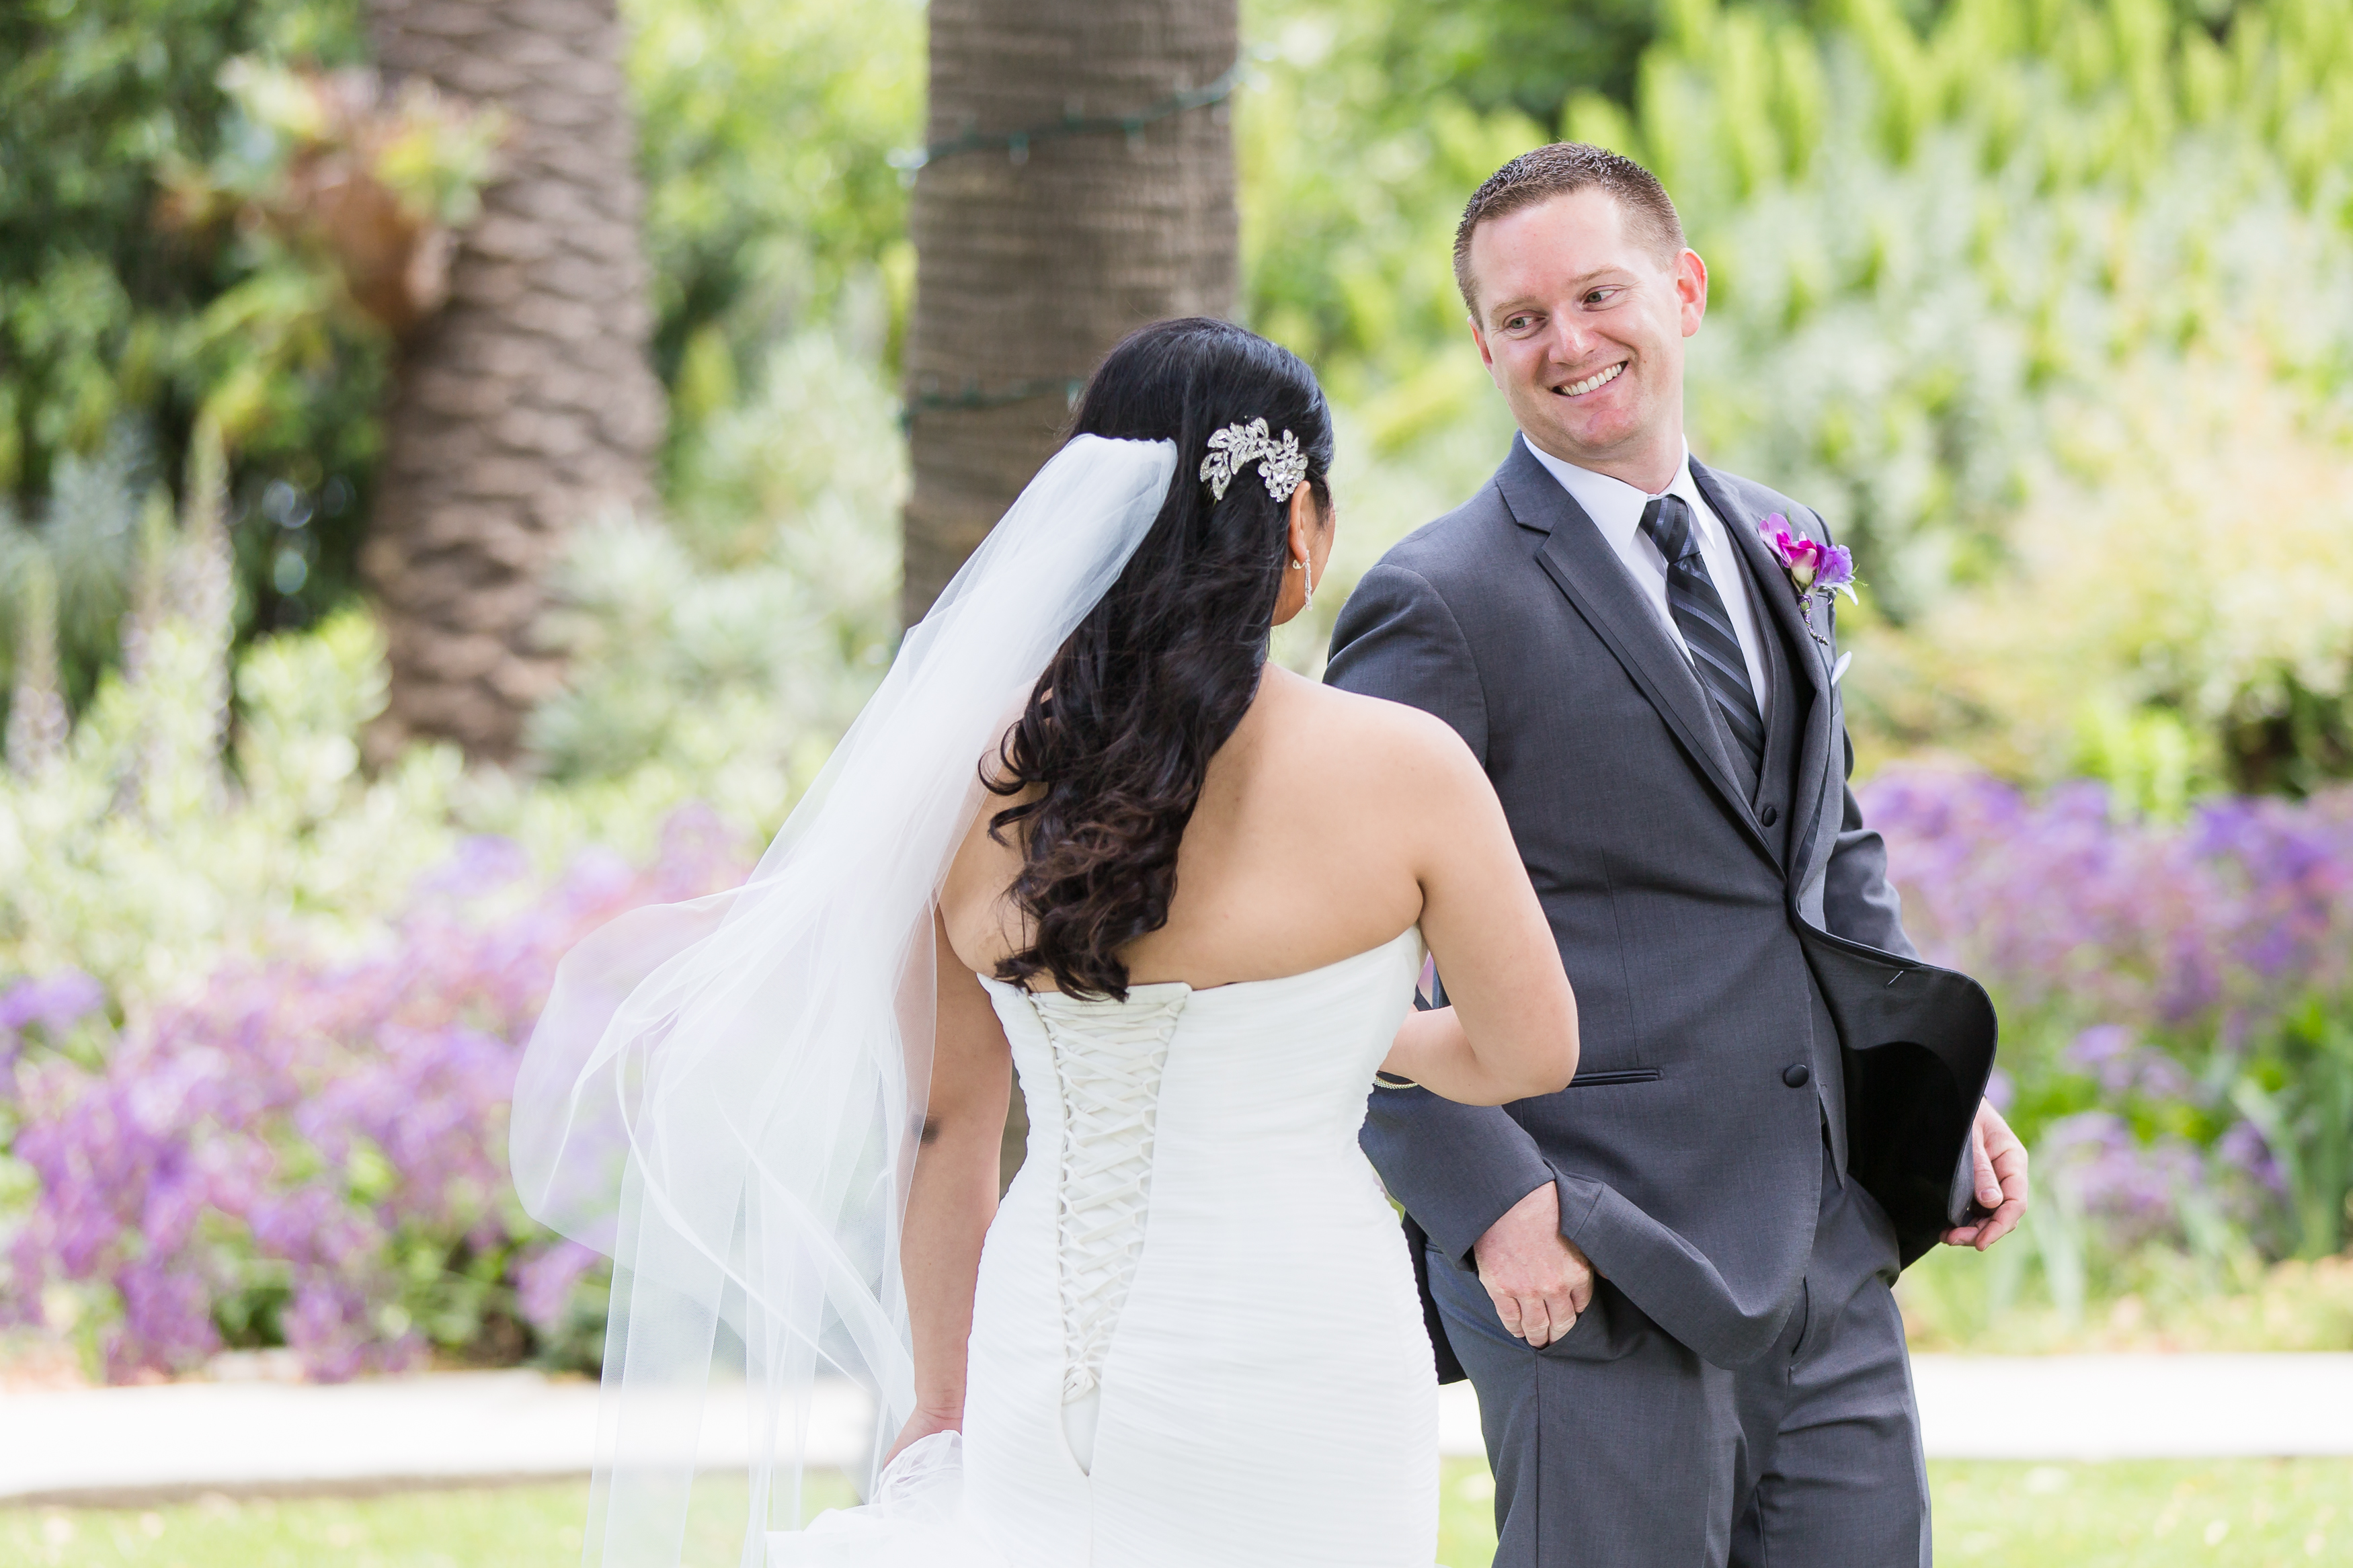 Bride and groom's first look at wedding in Camarillo